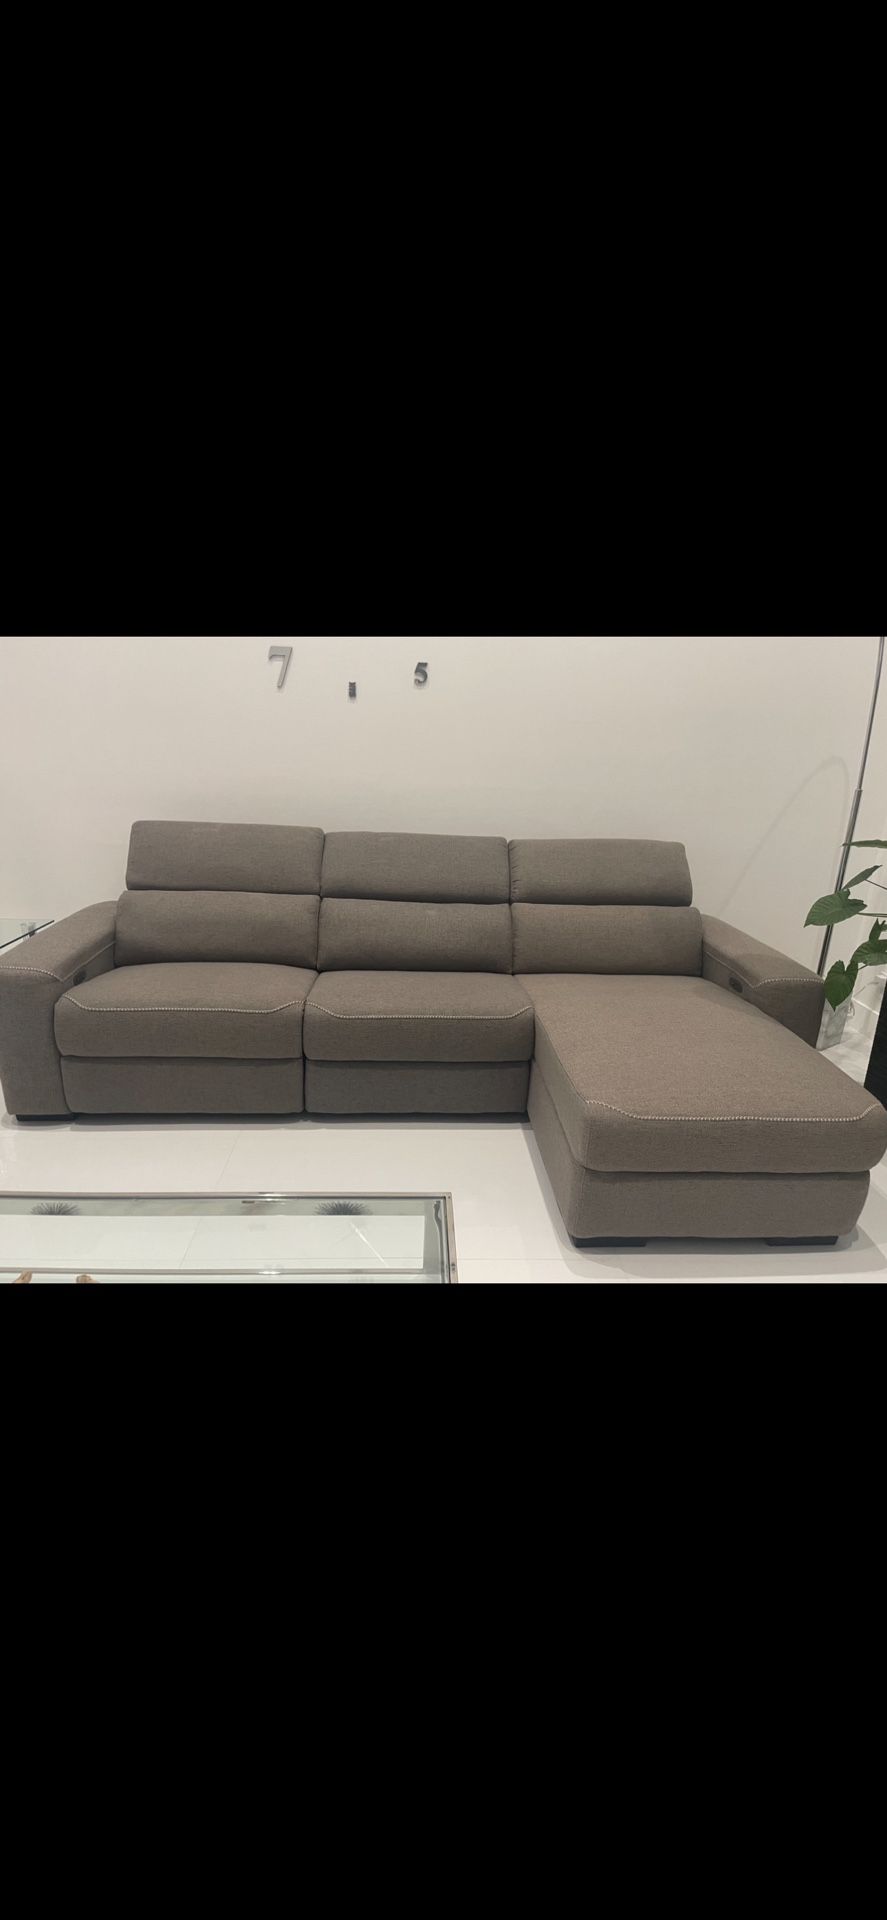 New !!! Fabric Sectional Sofa, 3 Piece, Grey, Recliner With Adjustable Headrest Chaise!!! Never used, Was $2,300 From City Furniture 